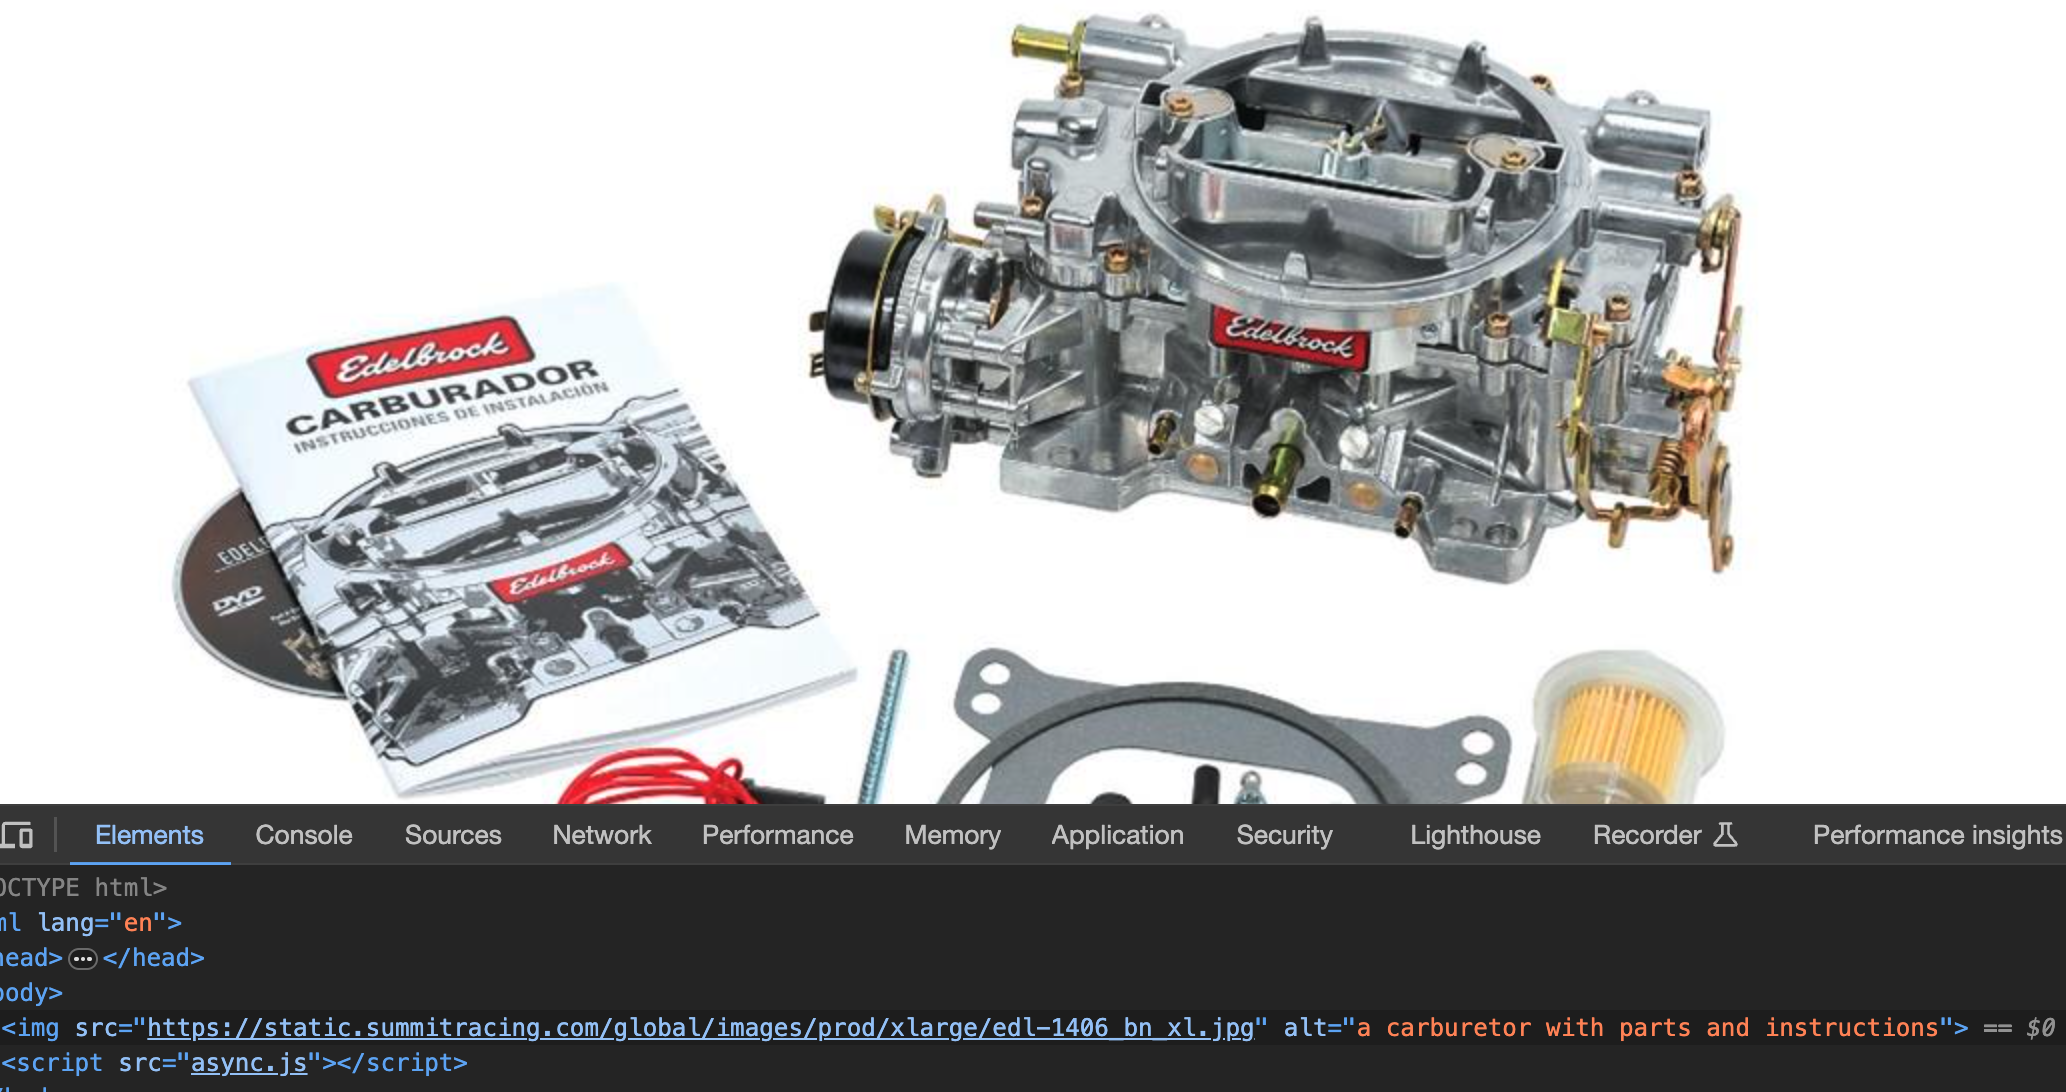 Screenshot of the browser with devtools open. In the main browser window is a picture of an silver colored carburetor. To the left is an instruction manual and DVD. To the bottom are some other parts such as gaskets and a fuel filter, which also come with the carburetor.  Devtools shows the alt attribute is "a carburetor with parts and instructions"